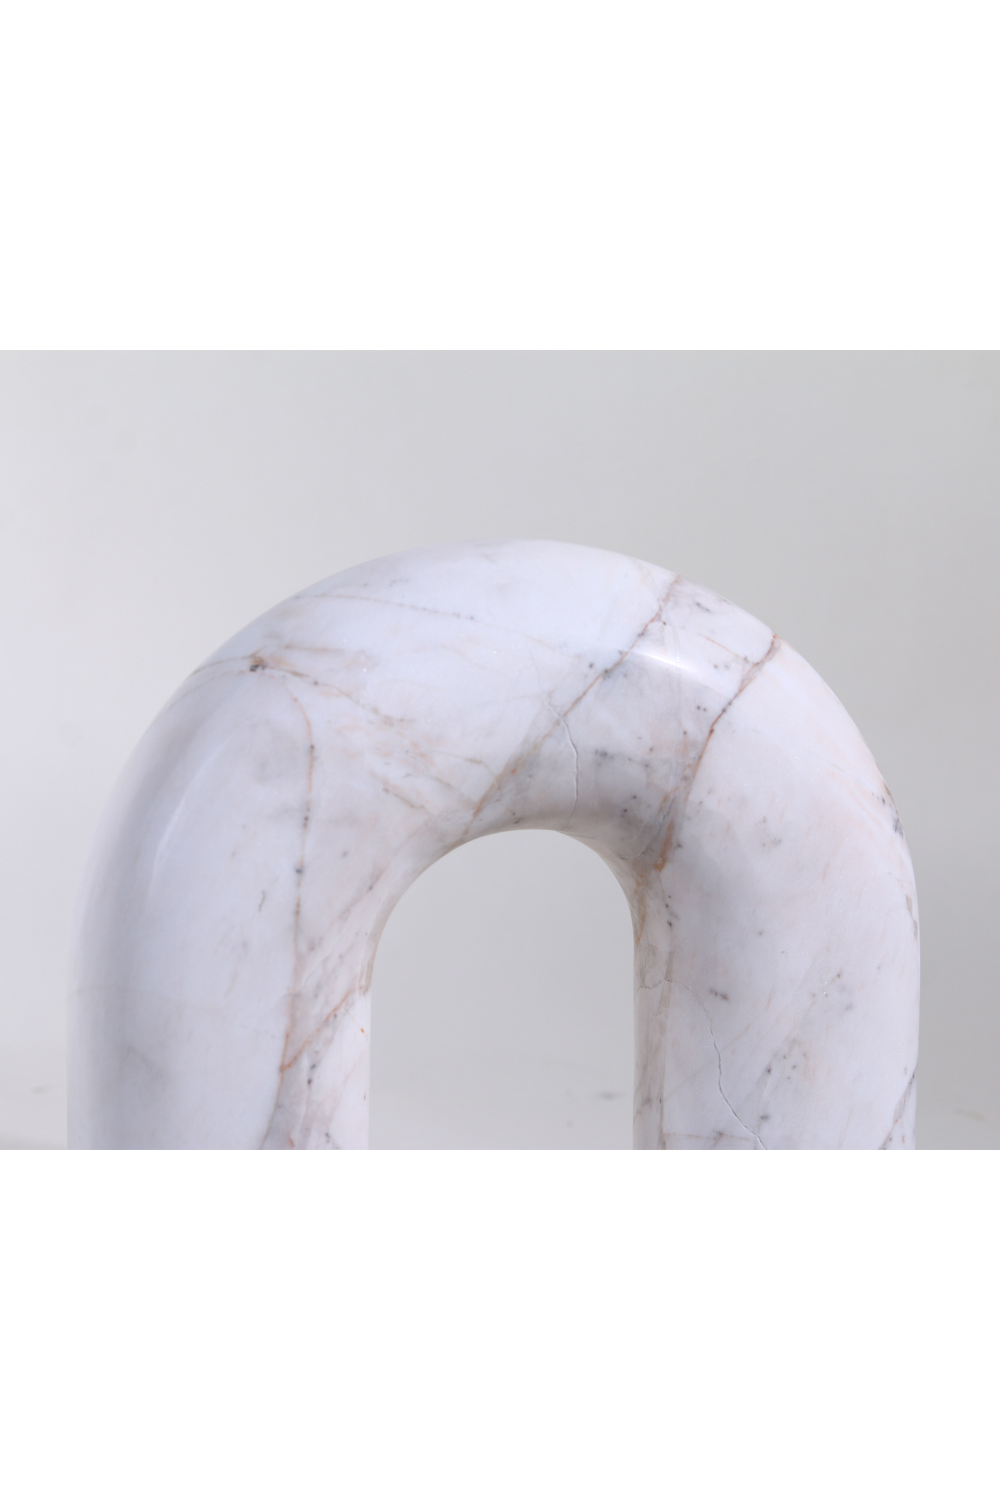 White Marble Curved Sculpture | Liang & Eimil Arc | Oroa.com